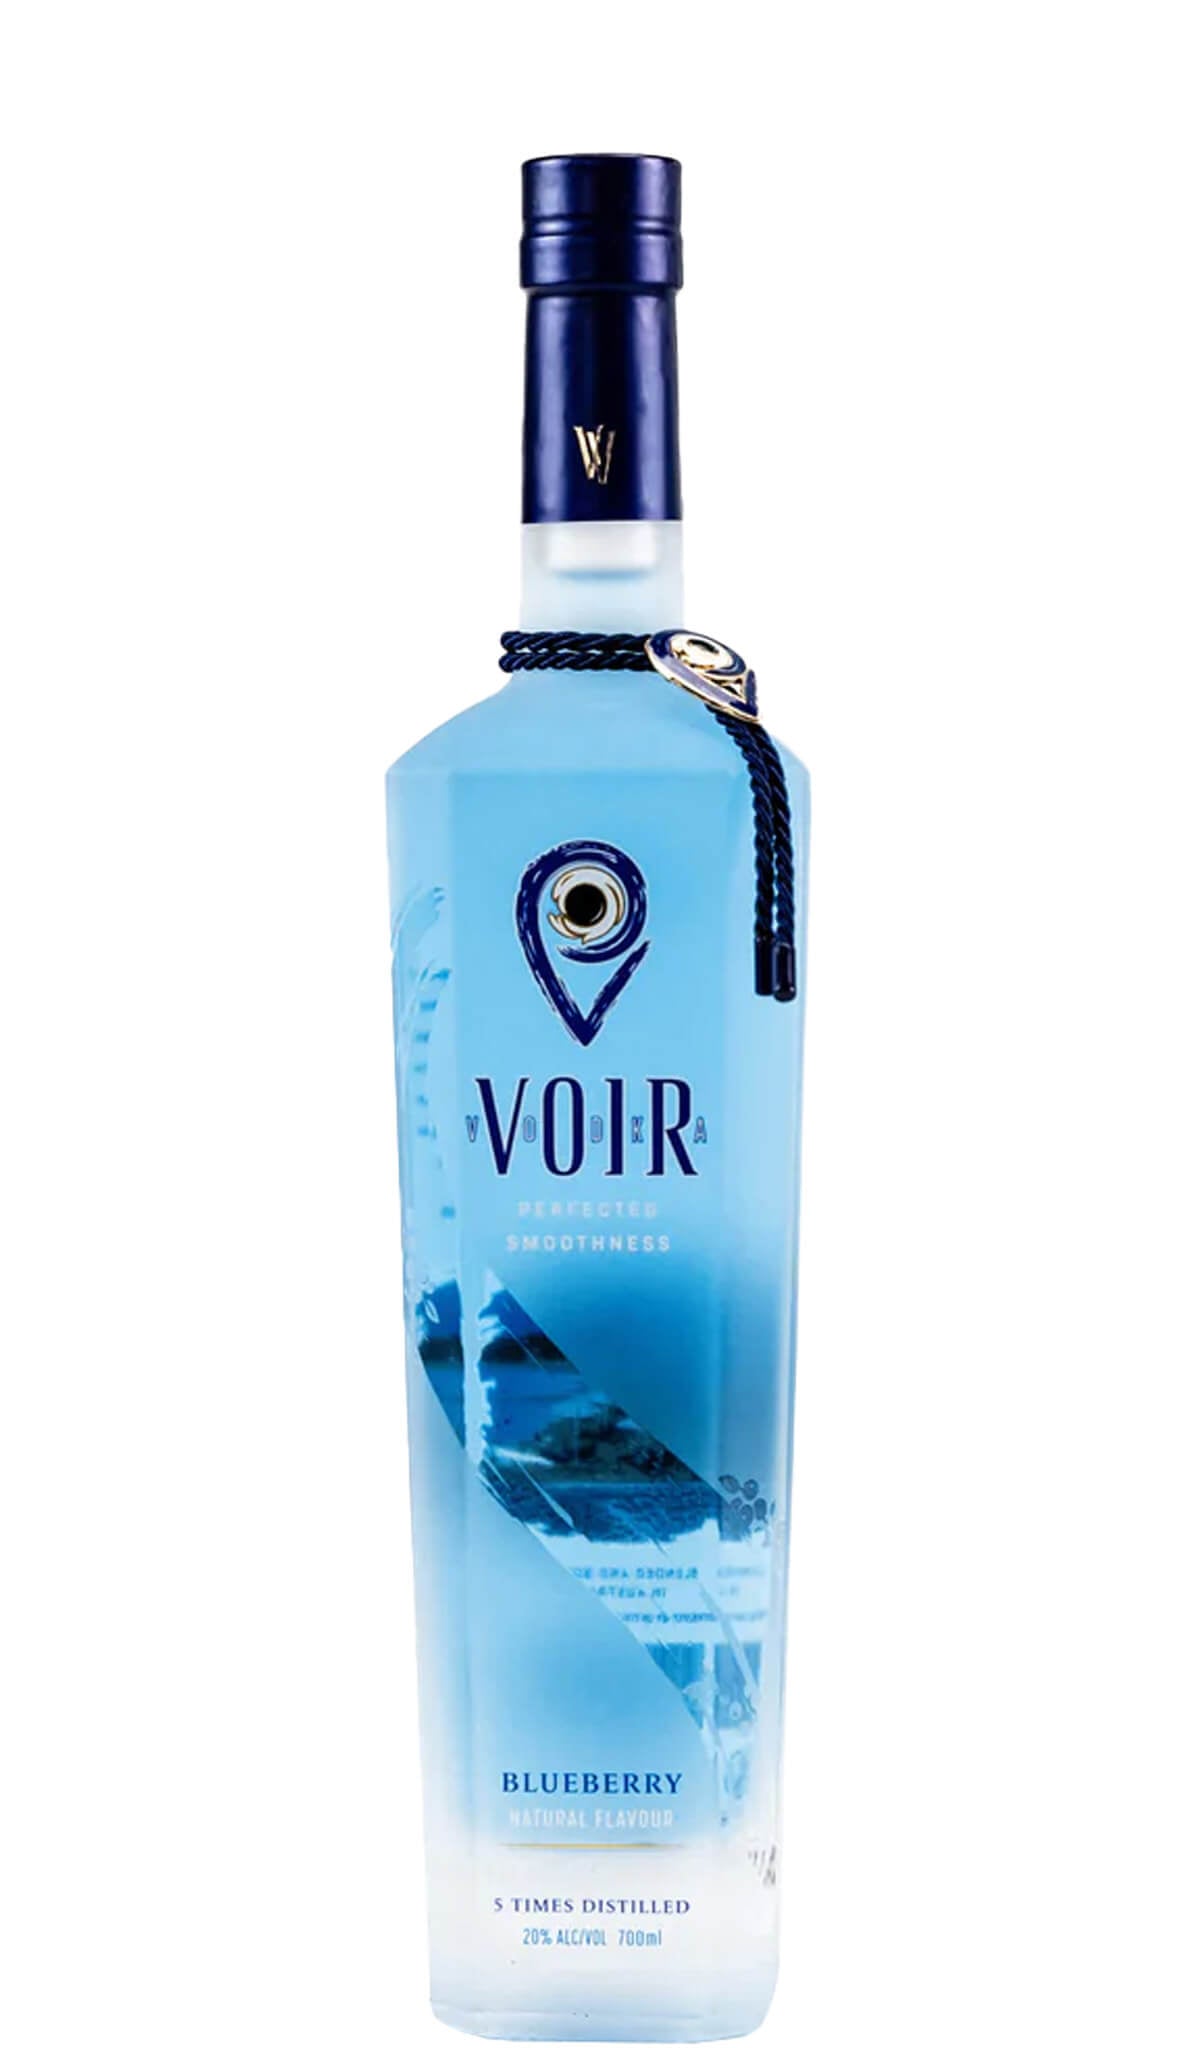 Find out more, explore the range and purchase Voir Blueberry Vodka 700ml available online at Wine Sellers Direct - Australia's independent liquor specialists.